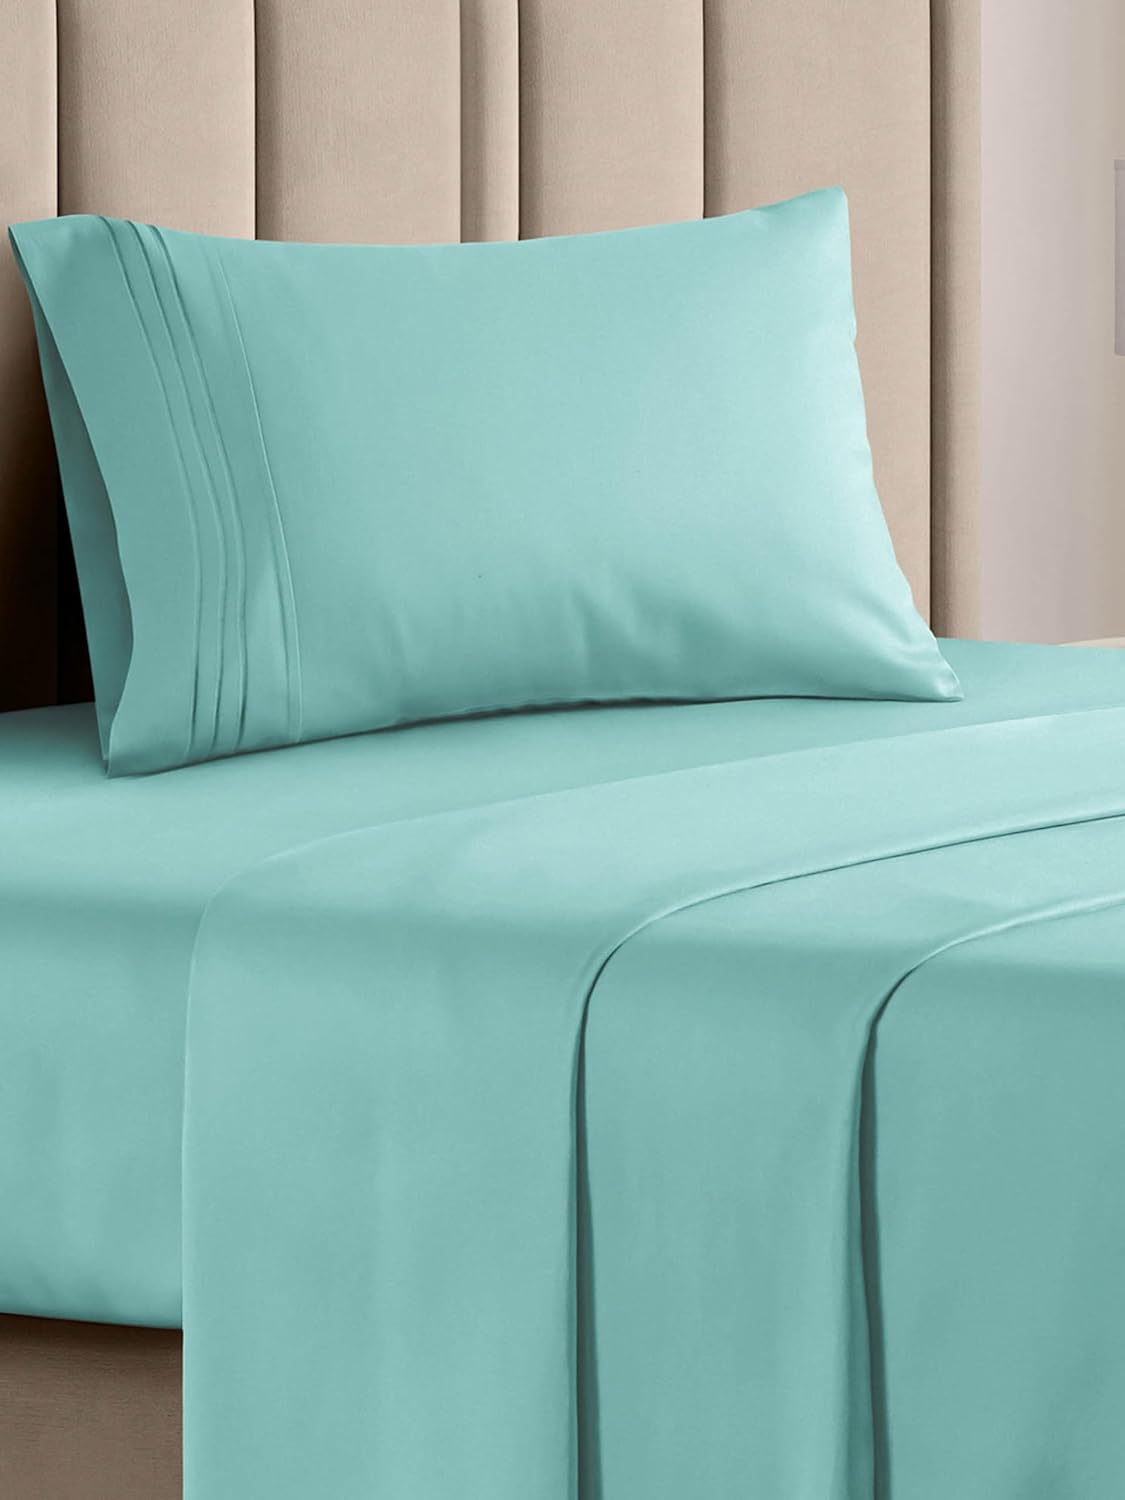 Comfy Breathable And Cooling Sheet Set